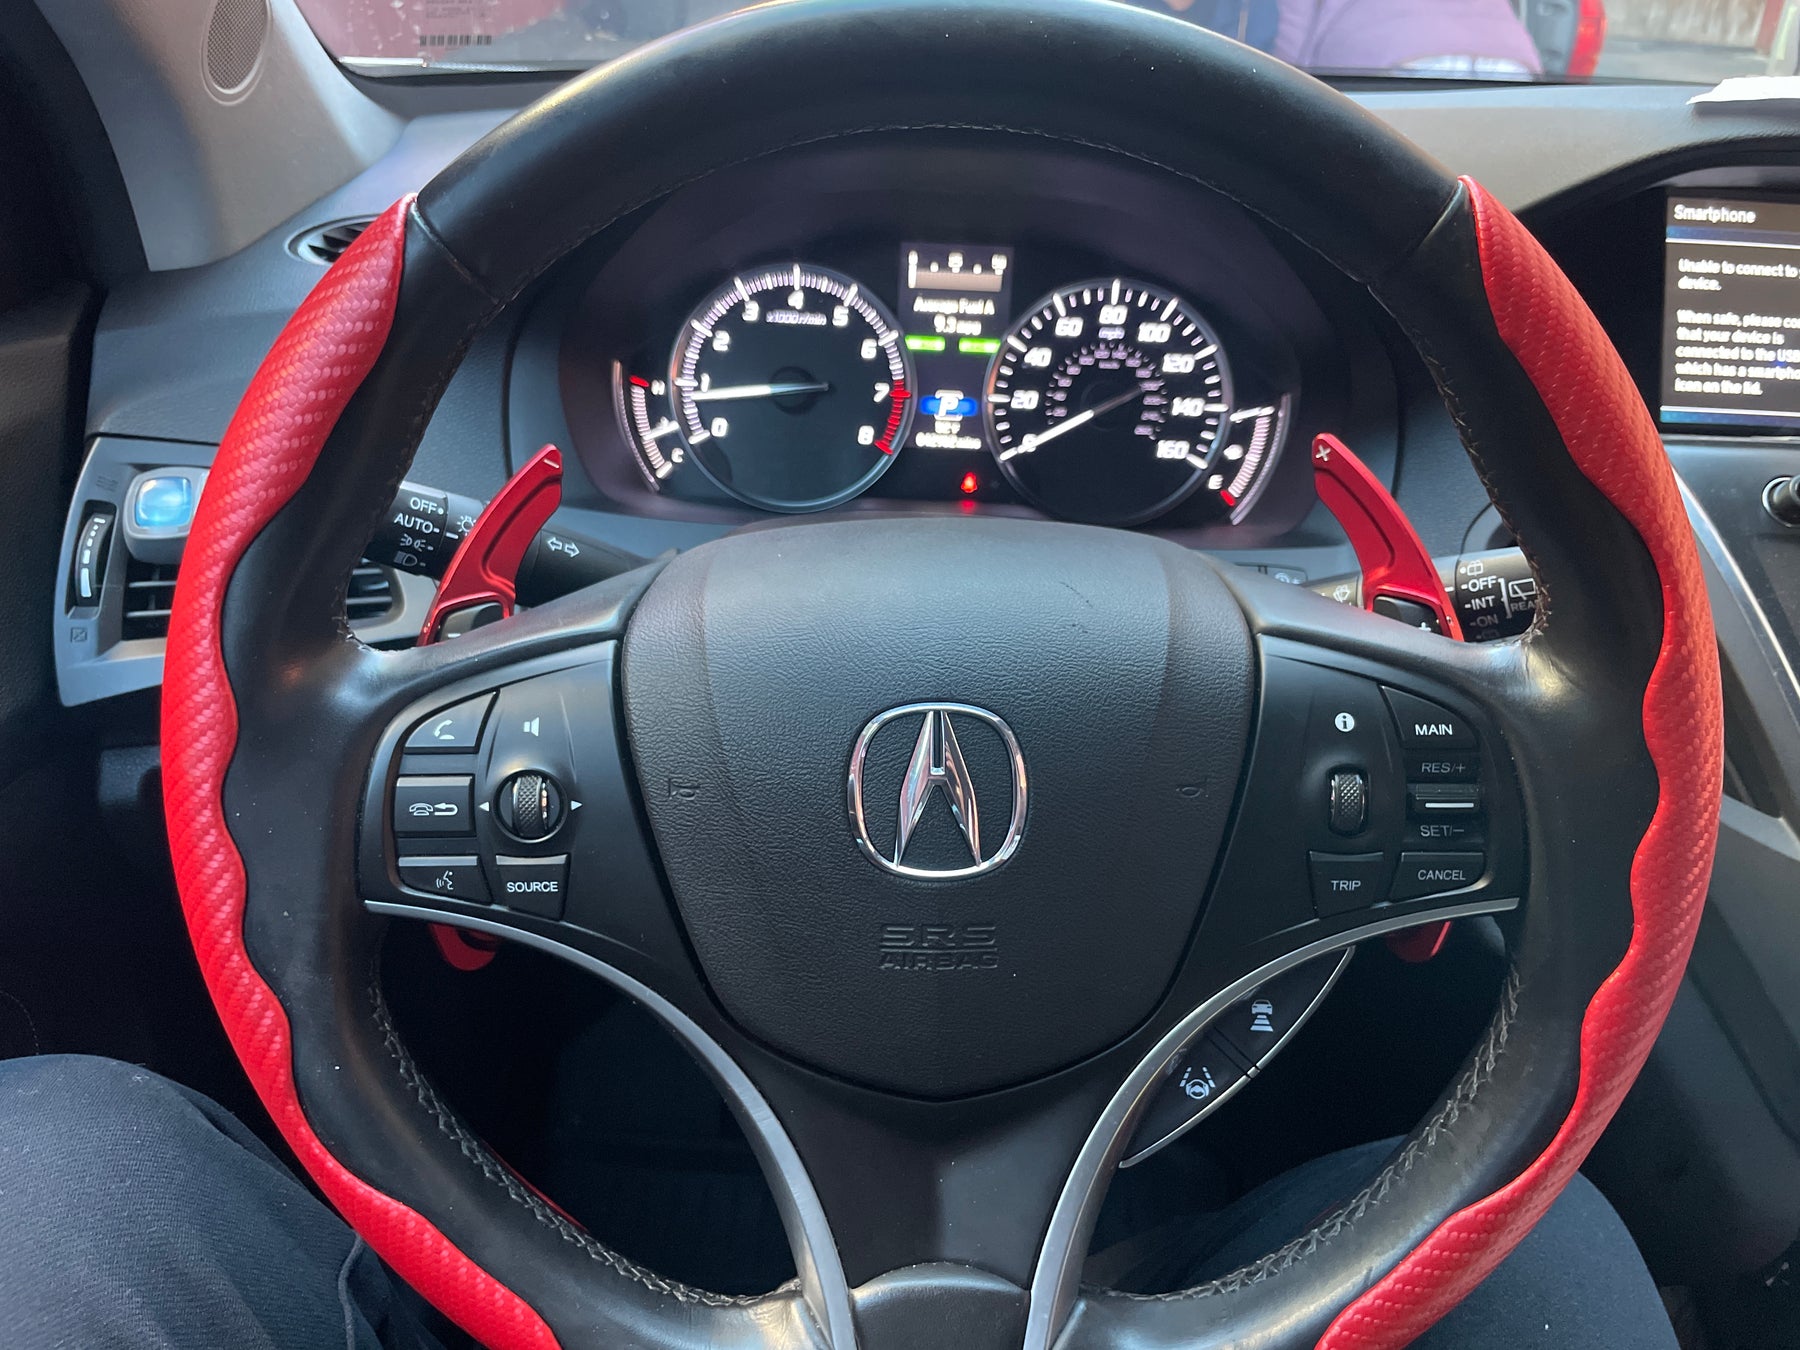 2019 Acura MDX Installed A-Spec Red Steering Wheel Paddle Shifter Extension